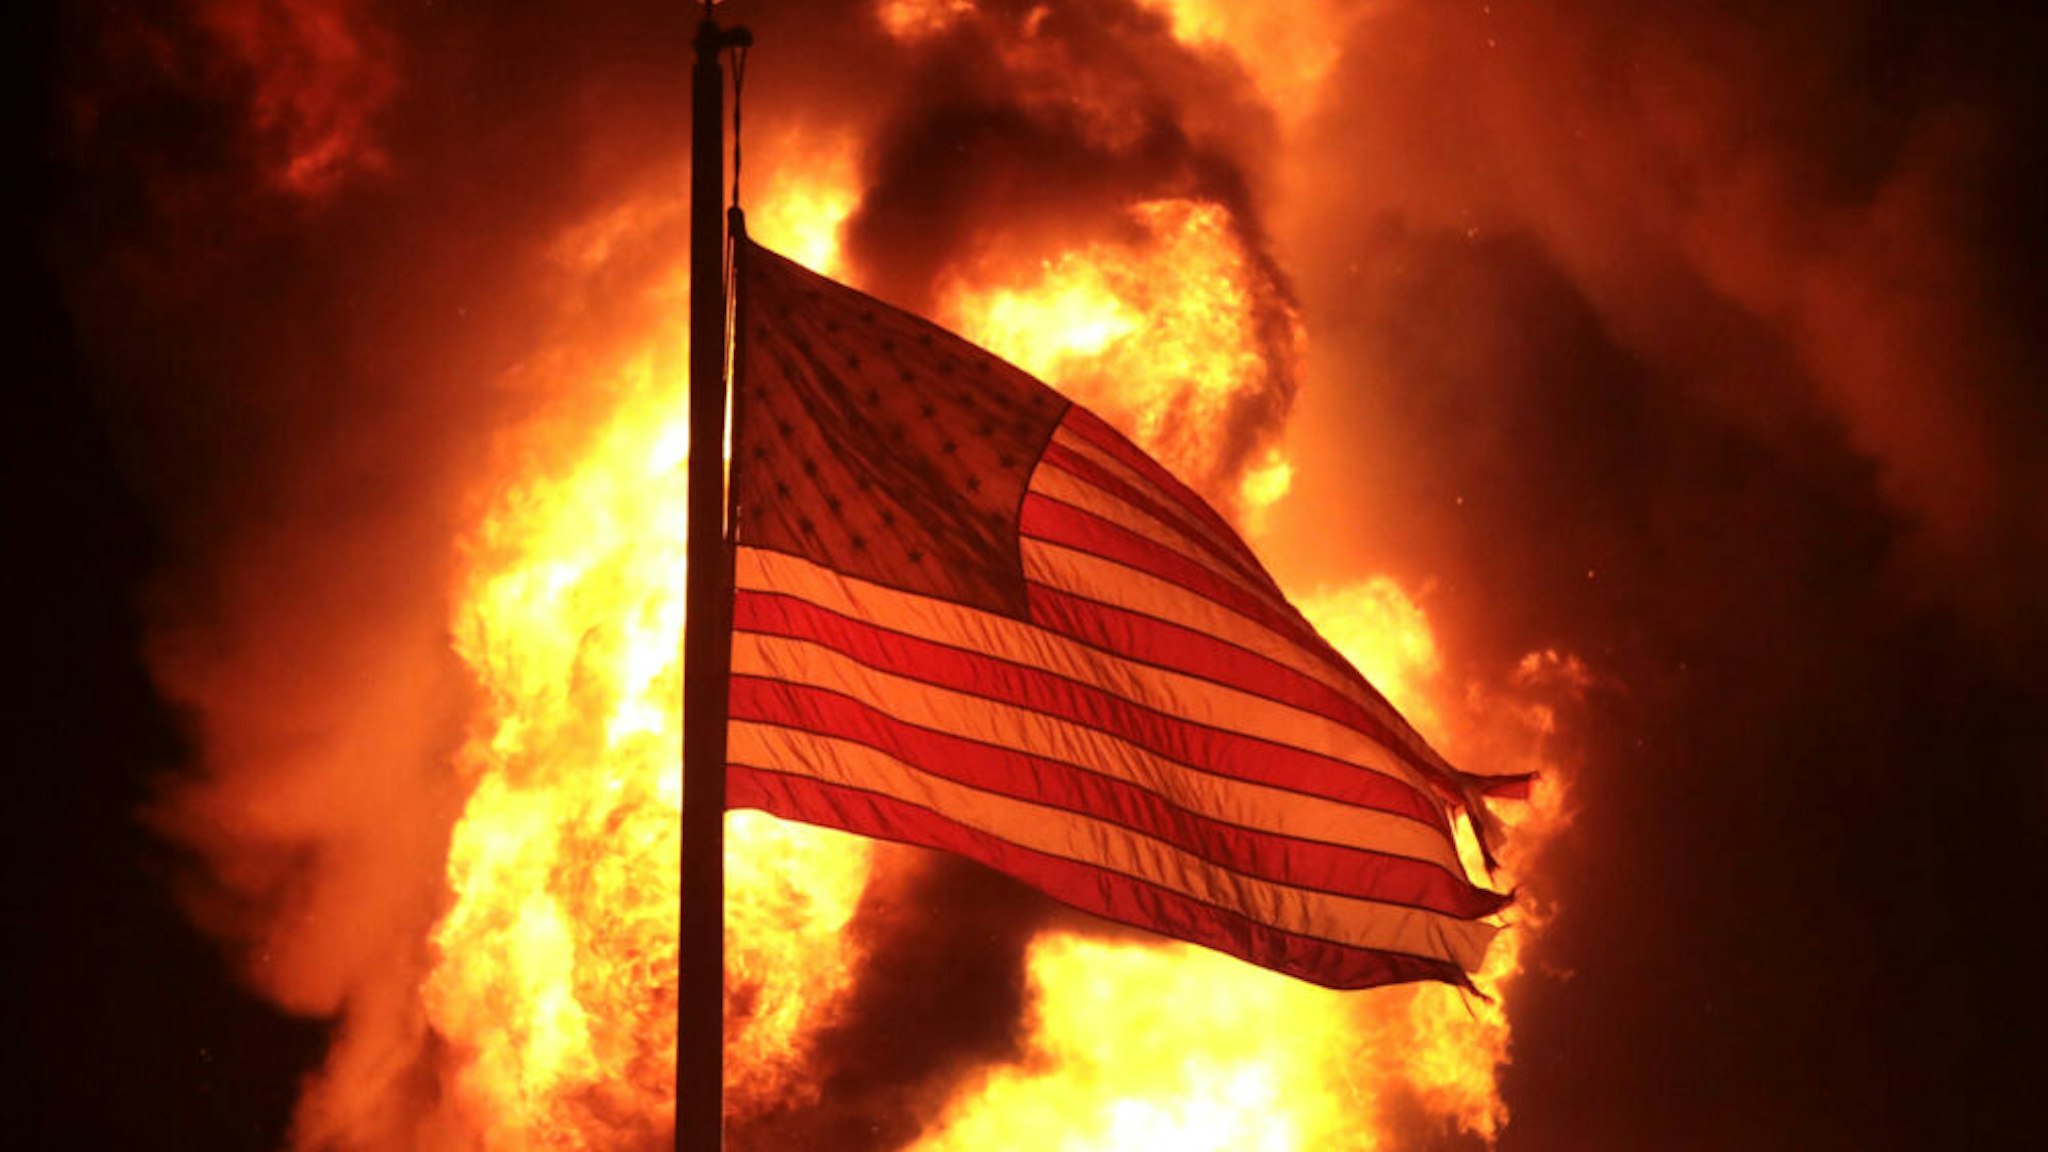 A flag flies in front of a department of corrections building after it was set ablaze during a second night of rioting on August 24, 2020 in Kenosha, Wisconsin. Rioting as well as clashes between police and protesters began Sunday night after a police officer shot Jacob Blake 7 times in the back in front of his three children.